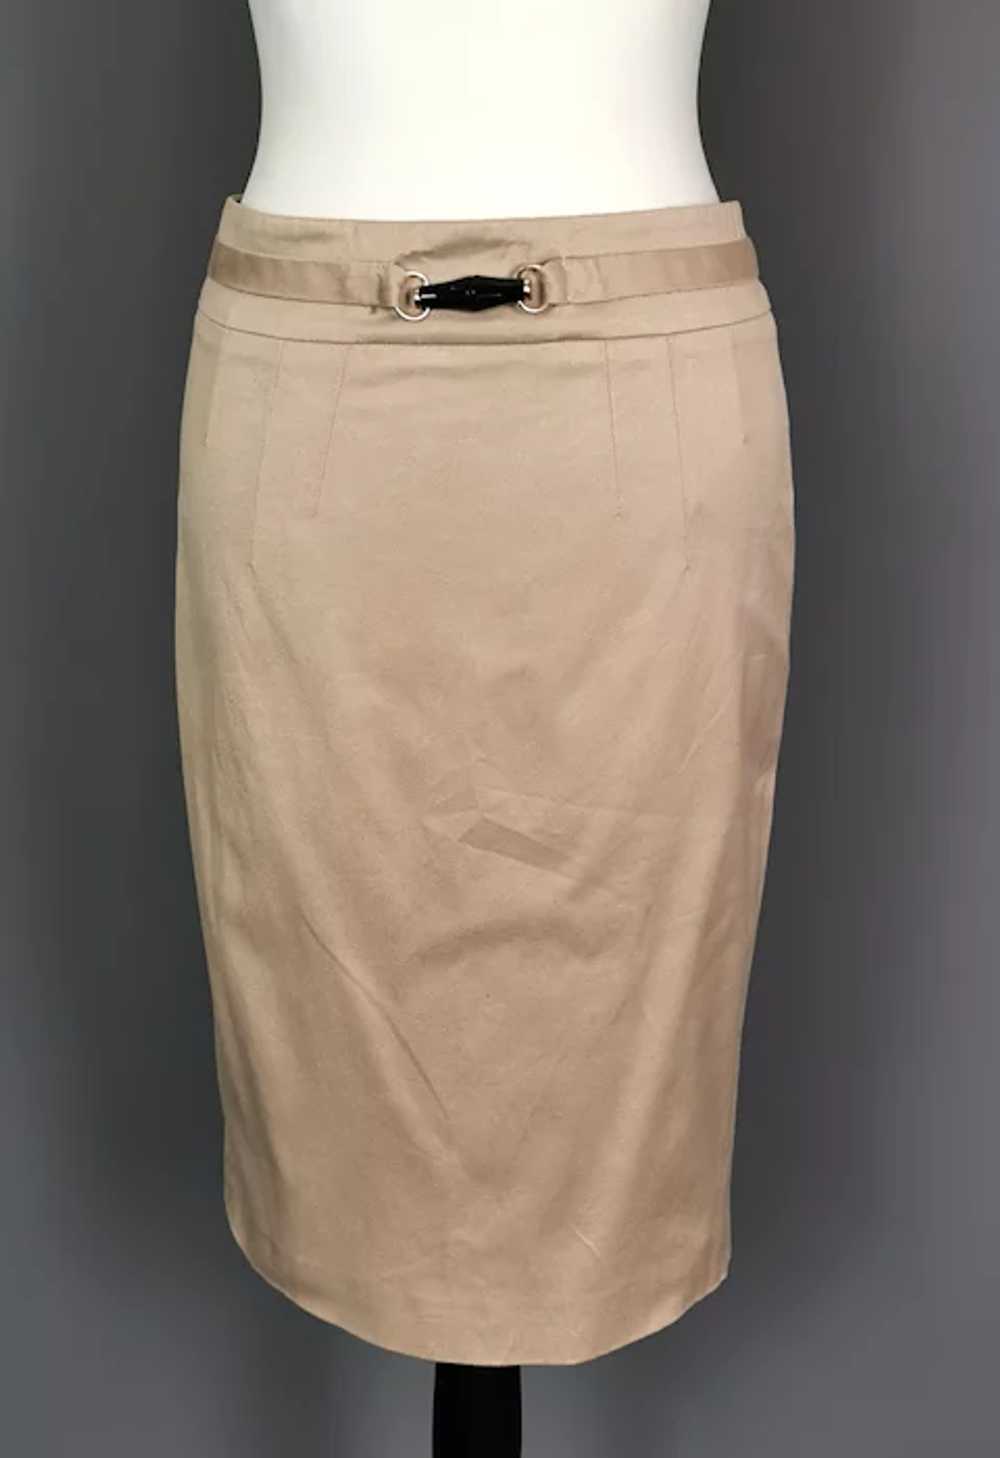 Vintage Gucci Tom Ford bamboo trim pencil skirt - image 4